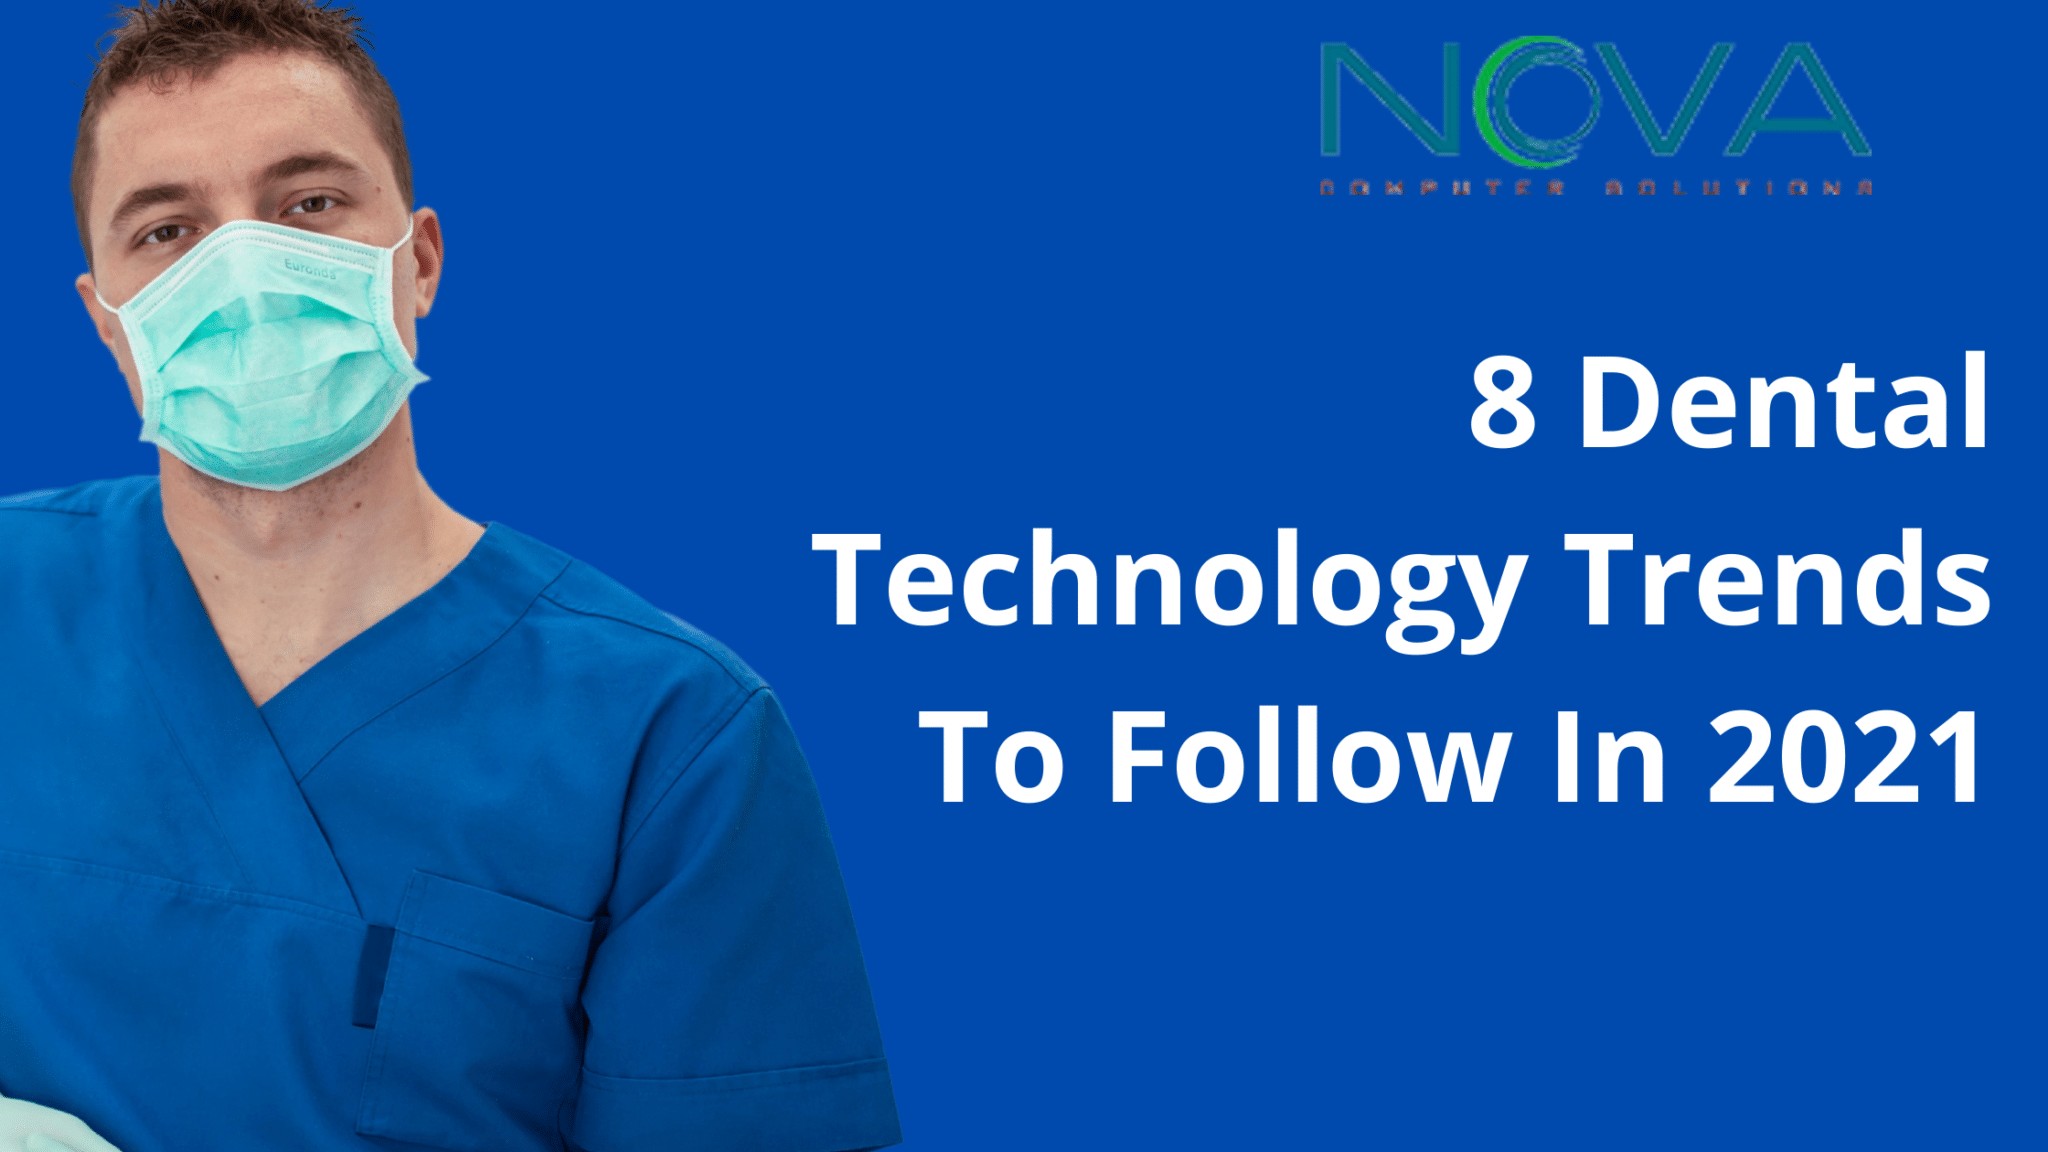 8 Dental Technology Trends To Follow In 2021